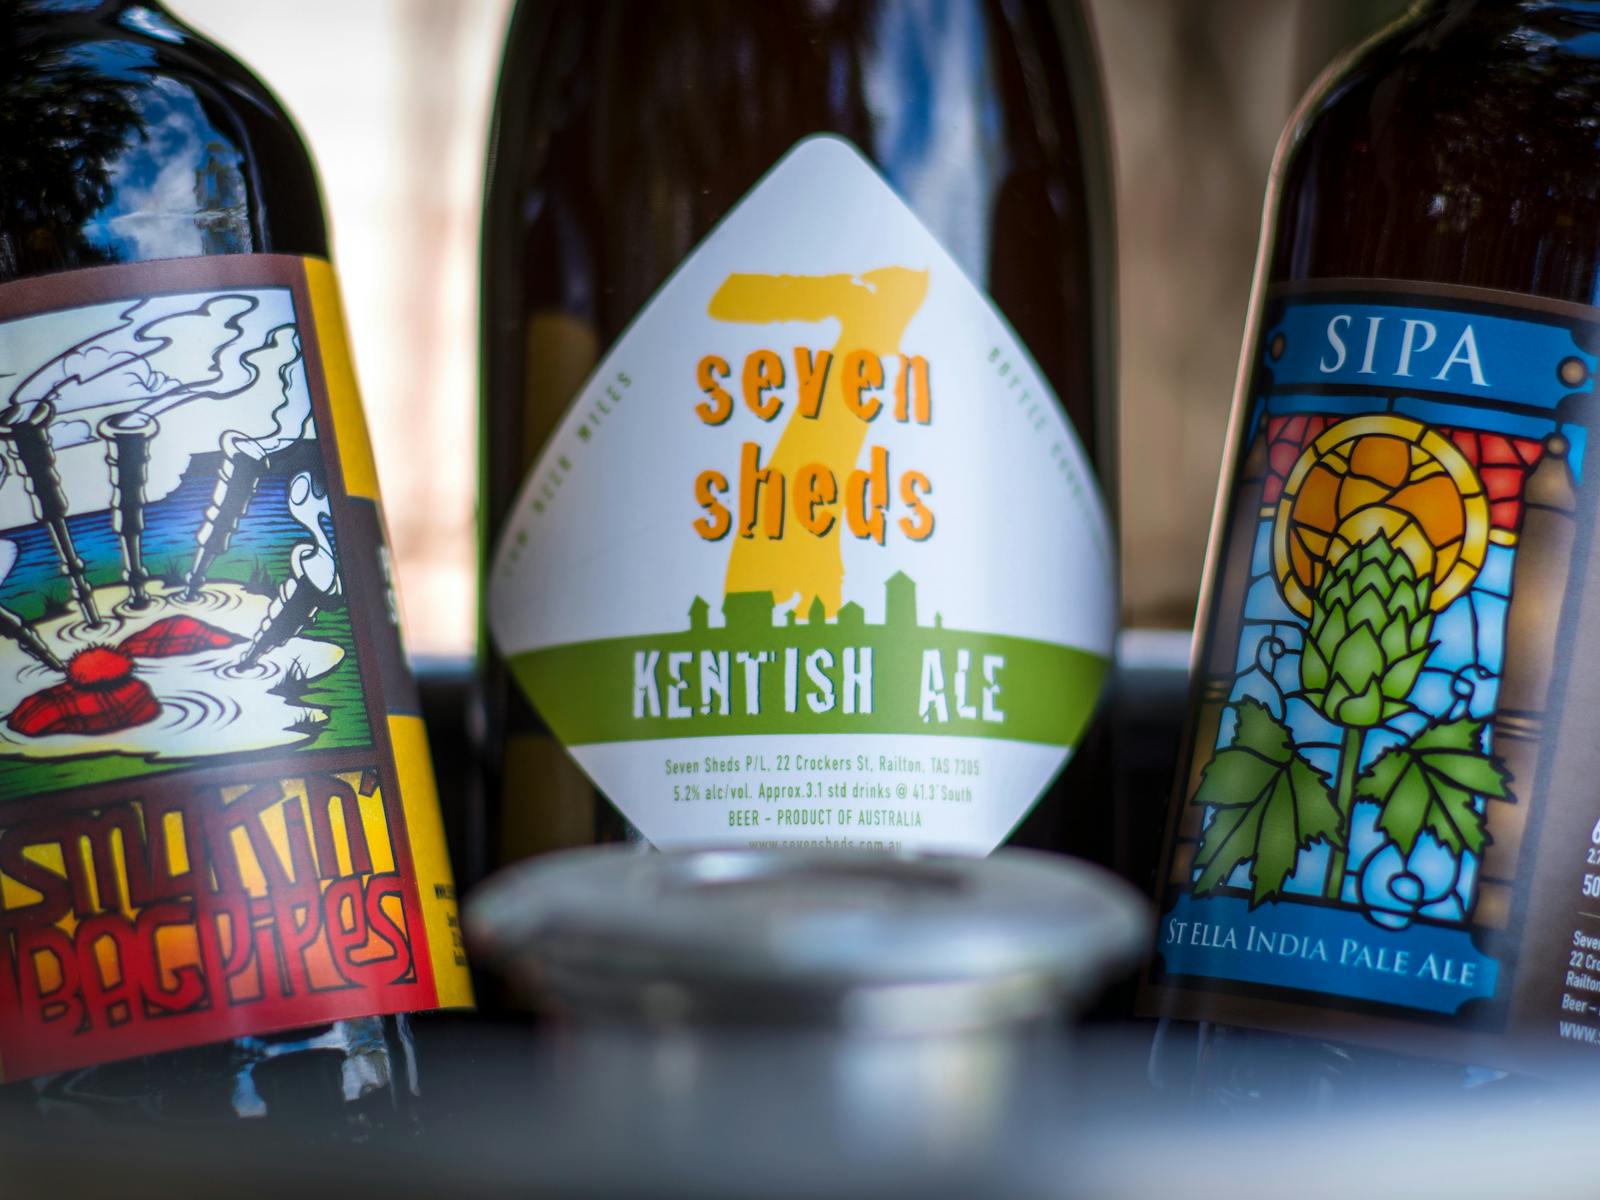 Sample beers at Seven Sheds Brewery